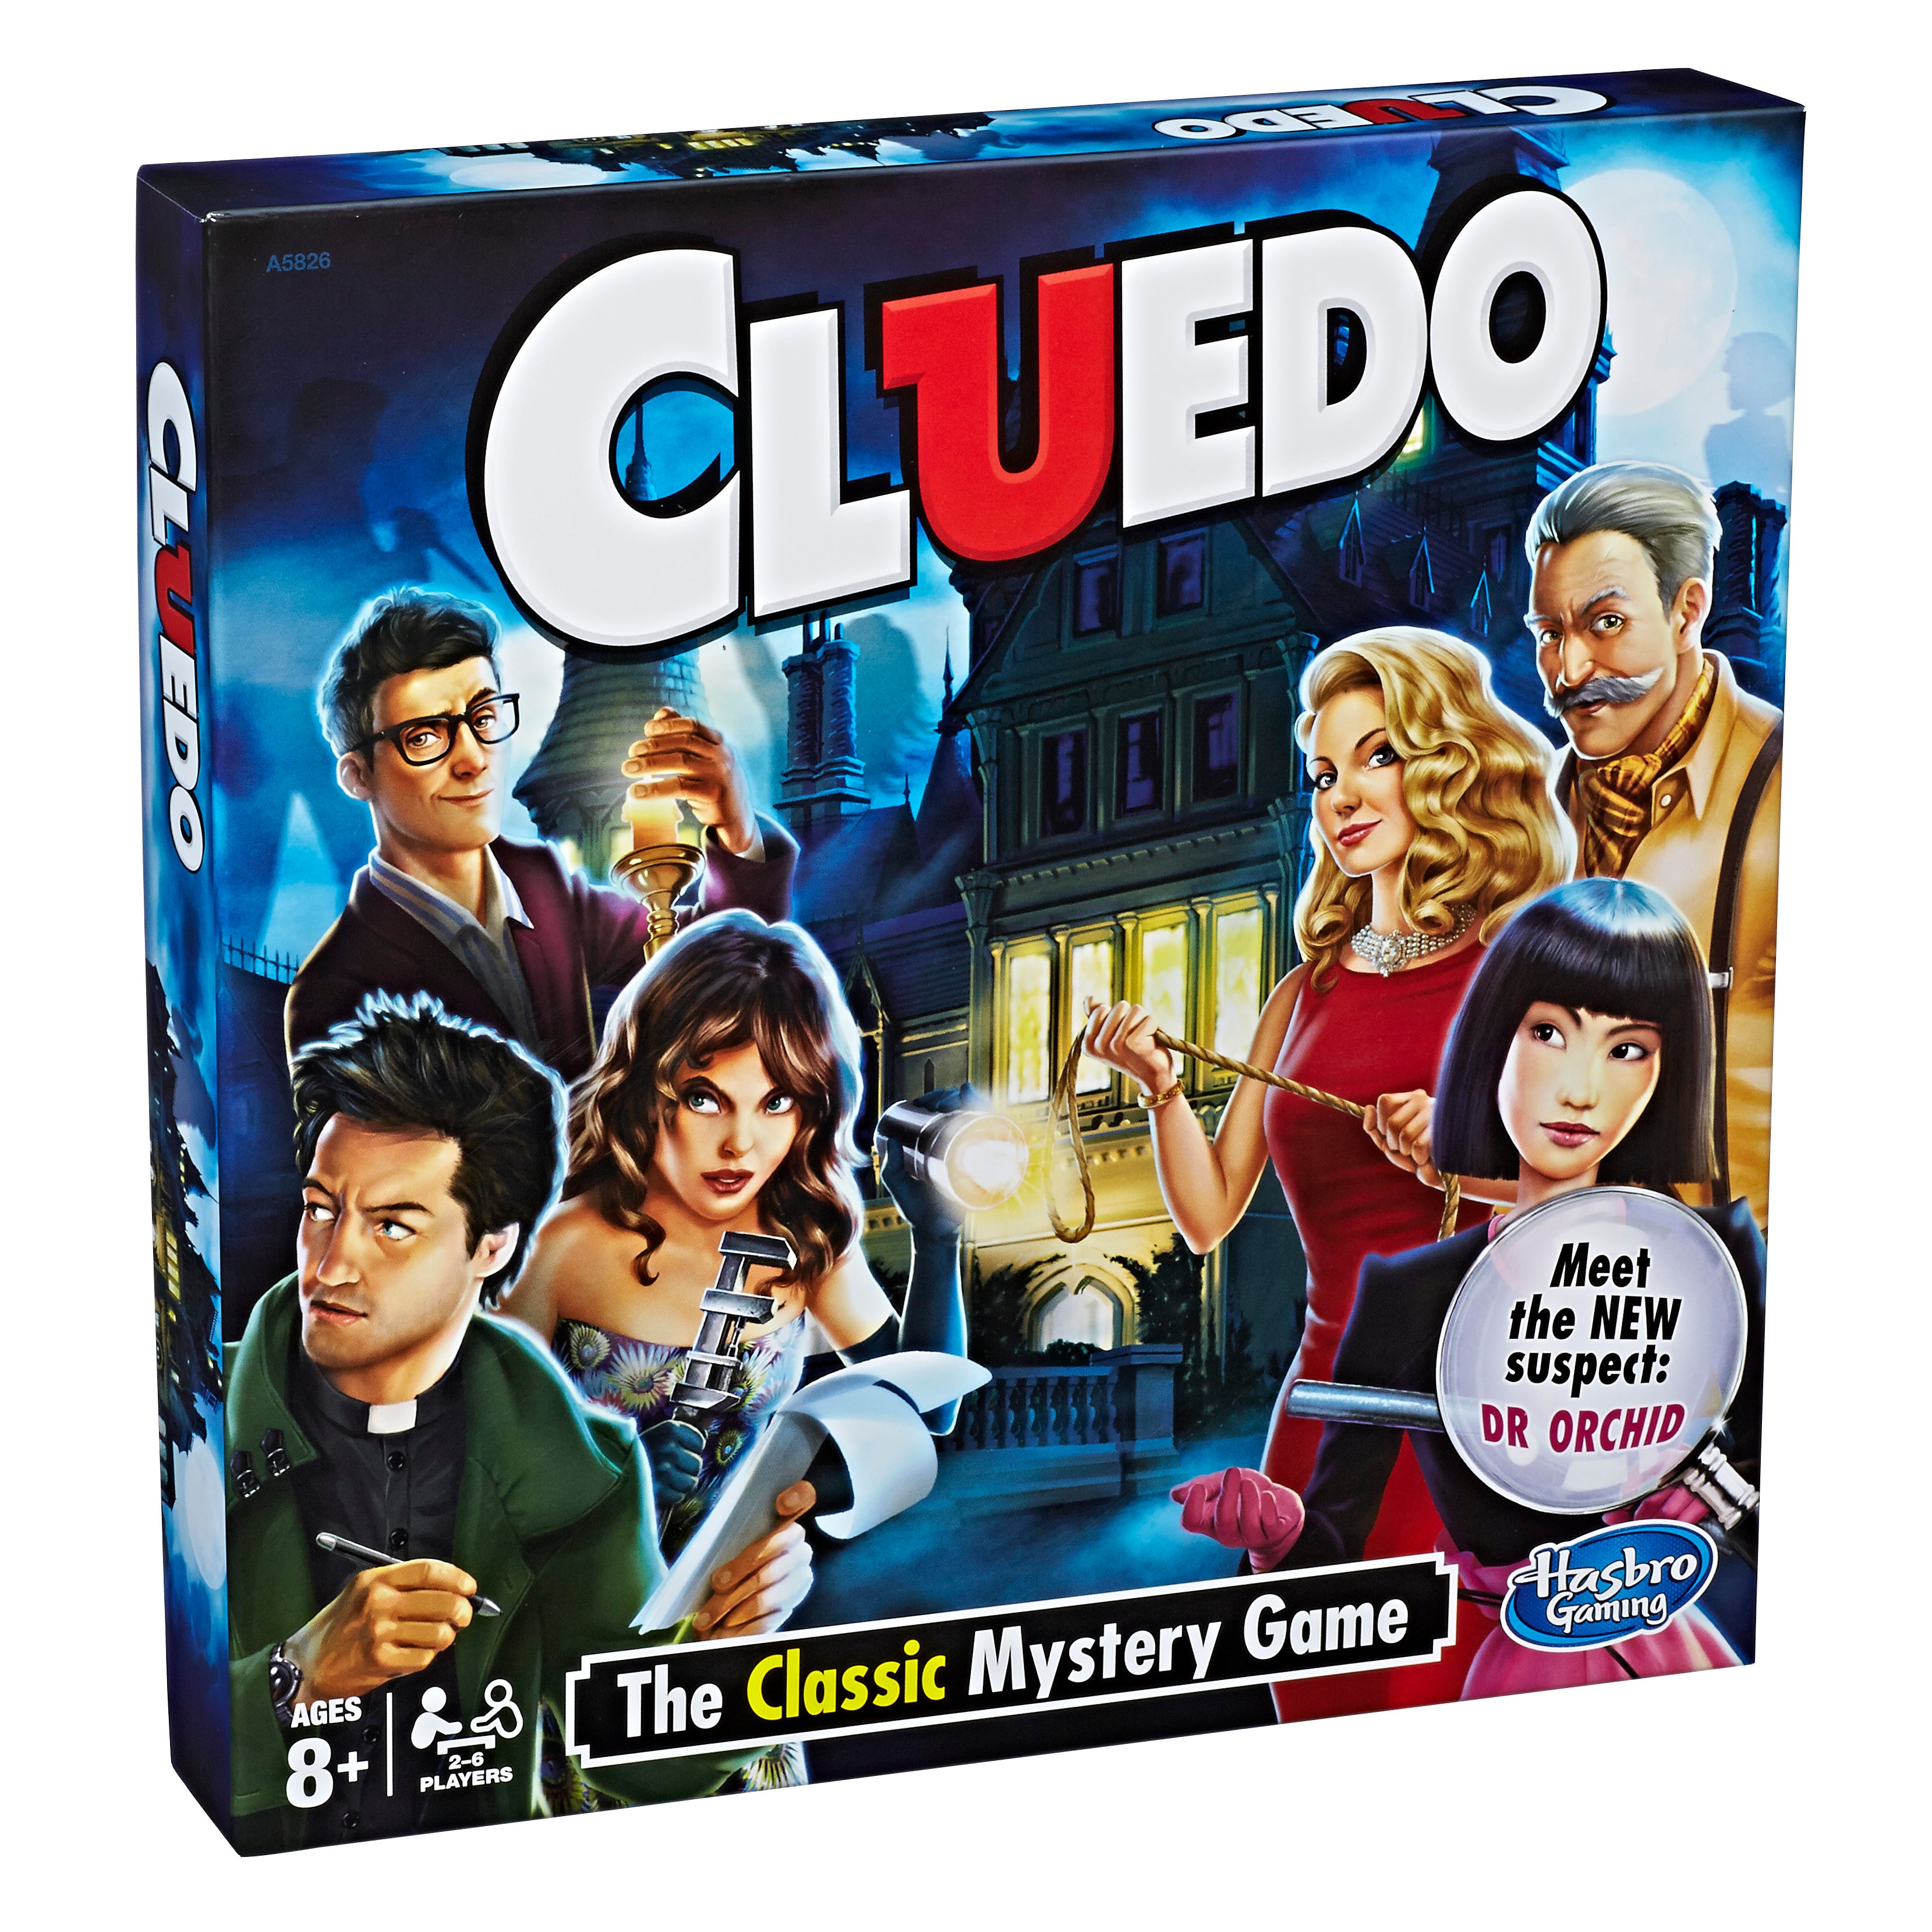 Cluedo: New version of Clue gives characters hot redesign